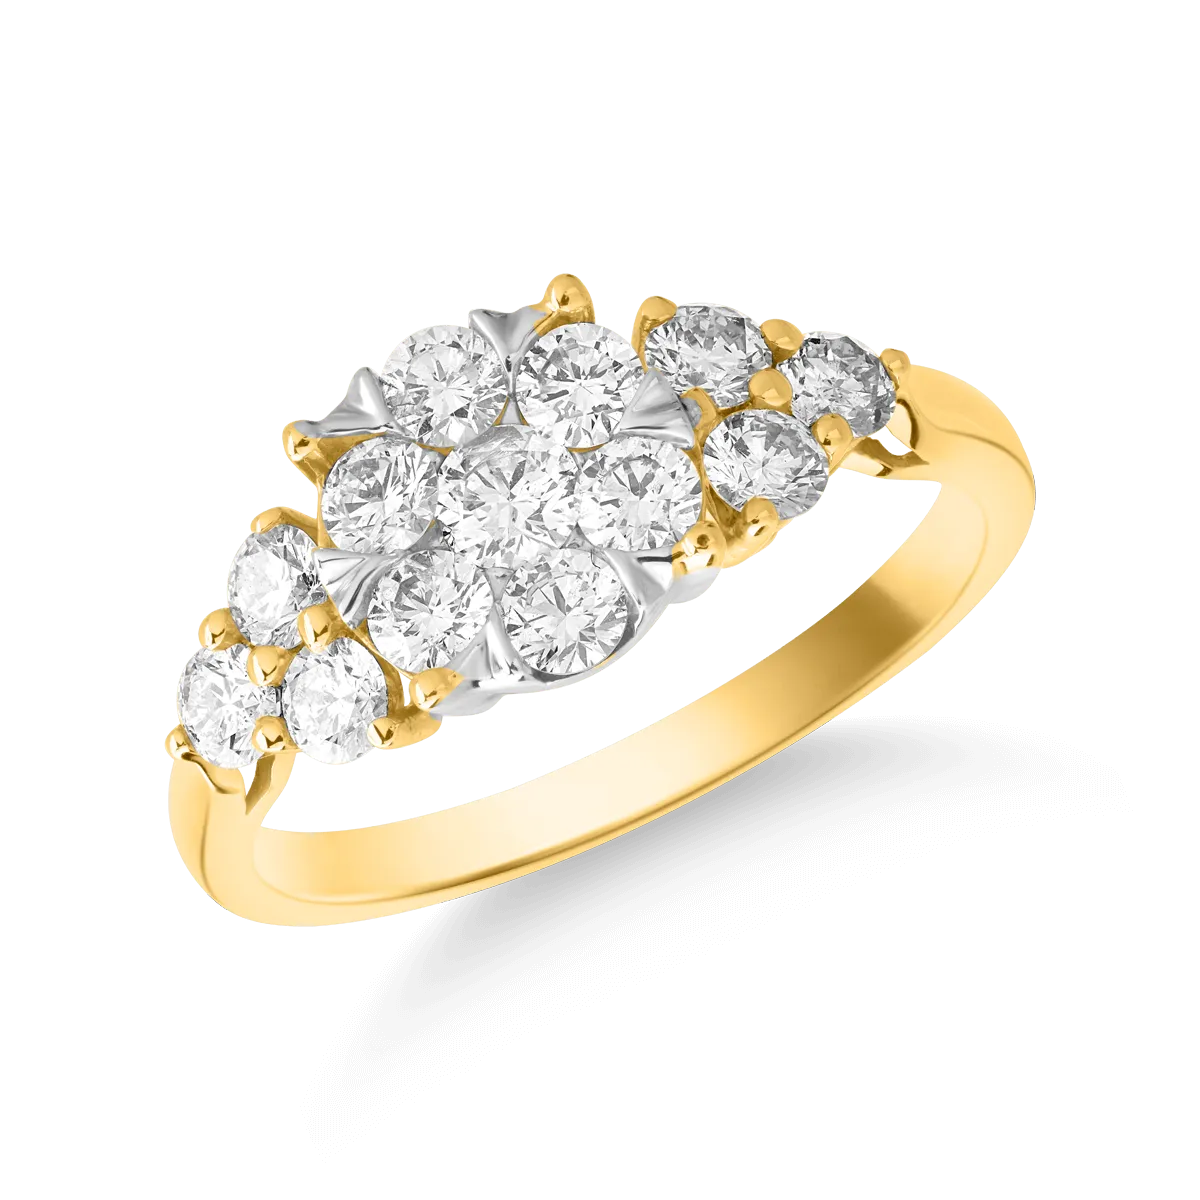 18K yellow gold ring with 1ct diamonds